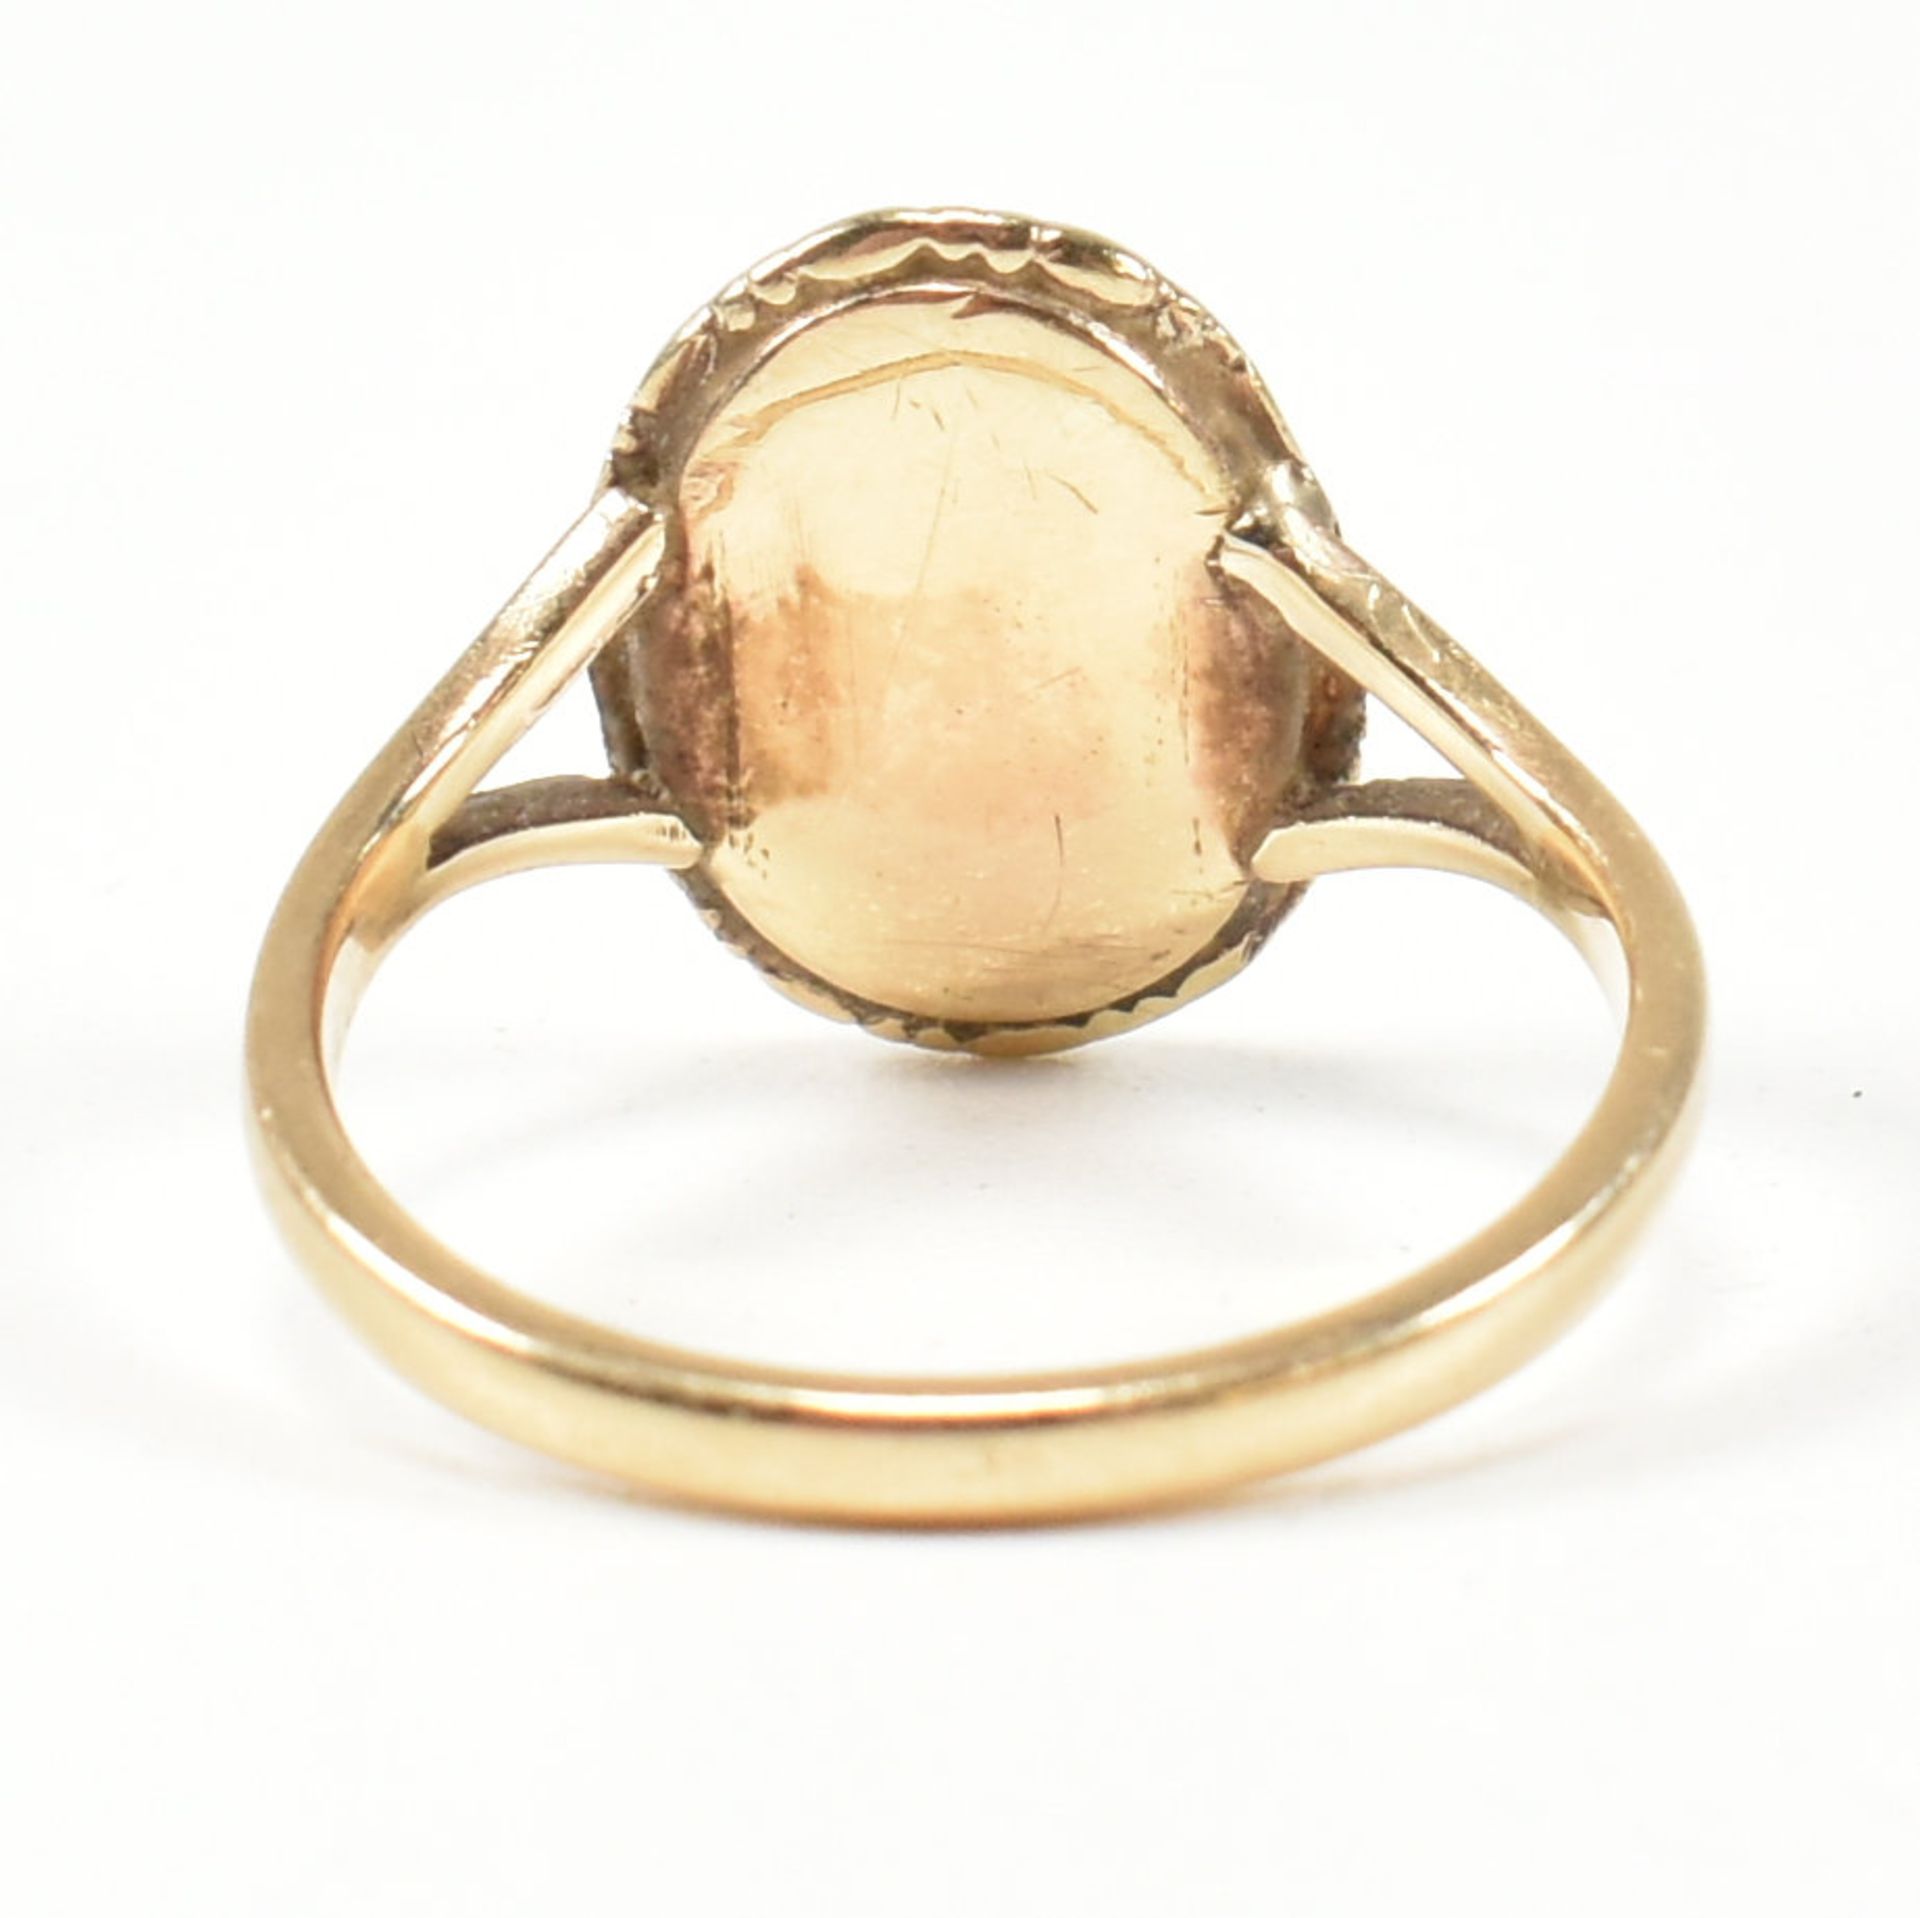 19TH CENTURY GOLD CAMEO RING - Image 4 of 6